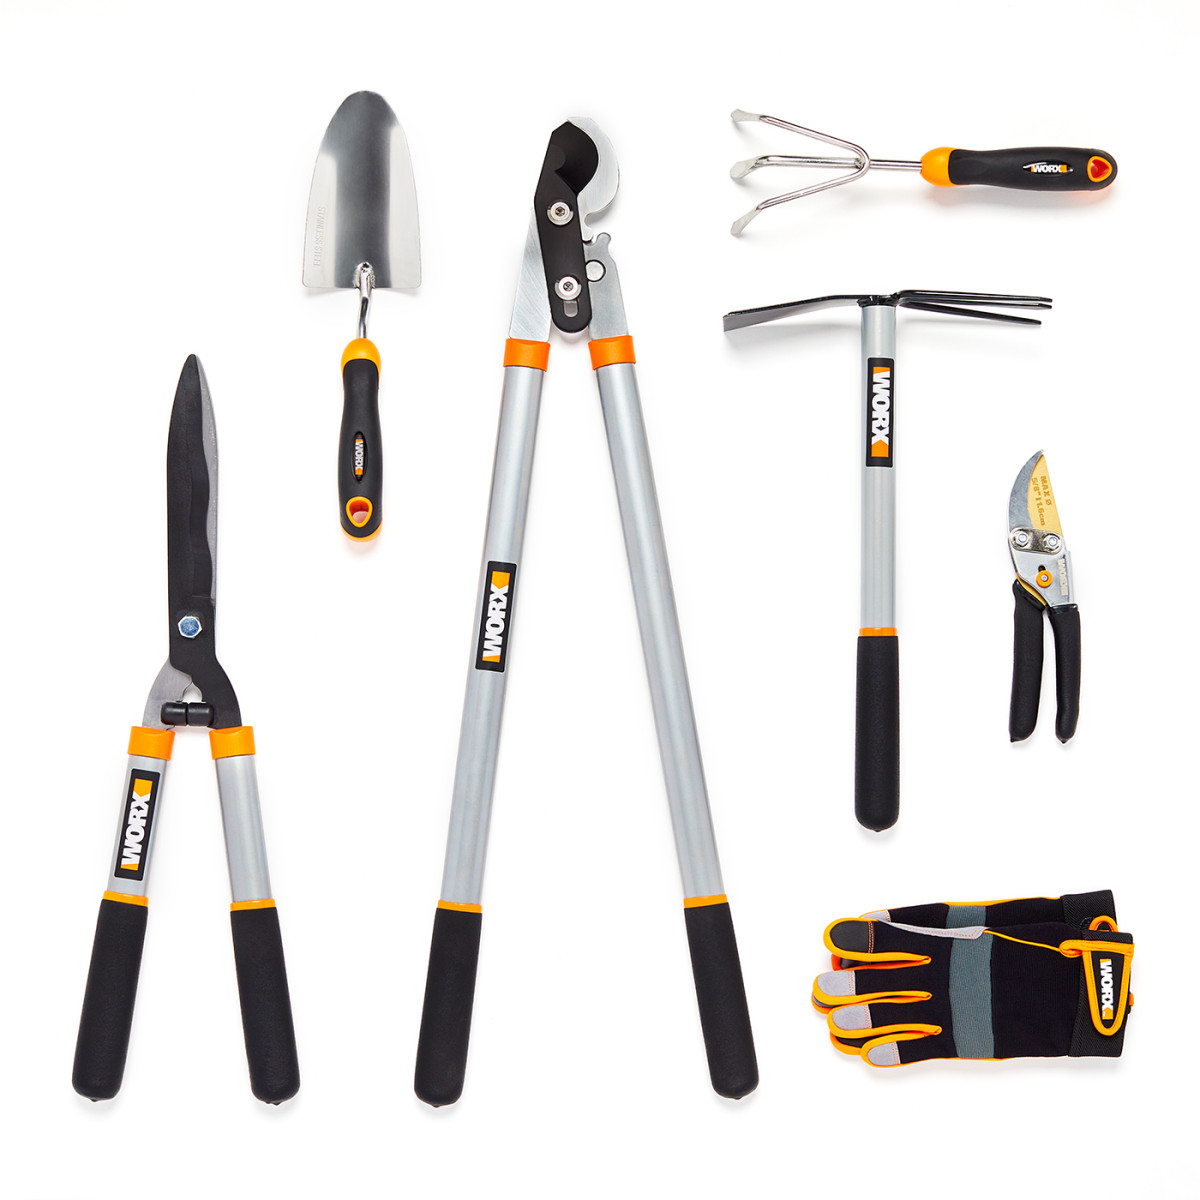 e-commerce product photography of garden tool set on white background for amazon website.